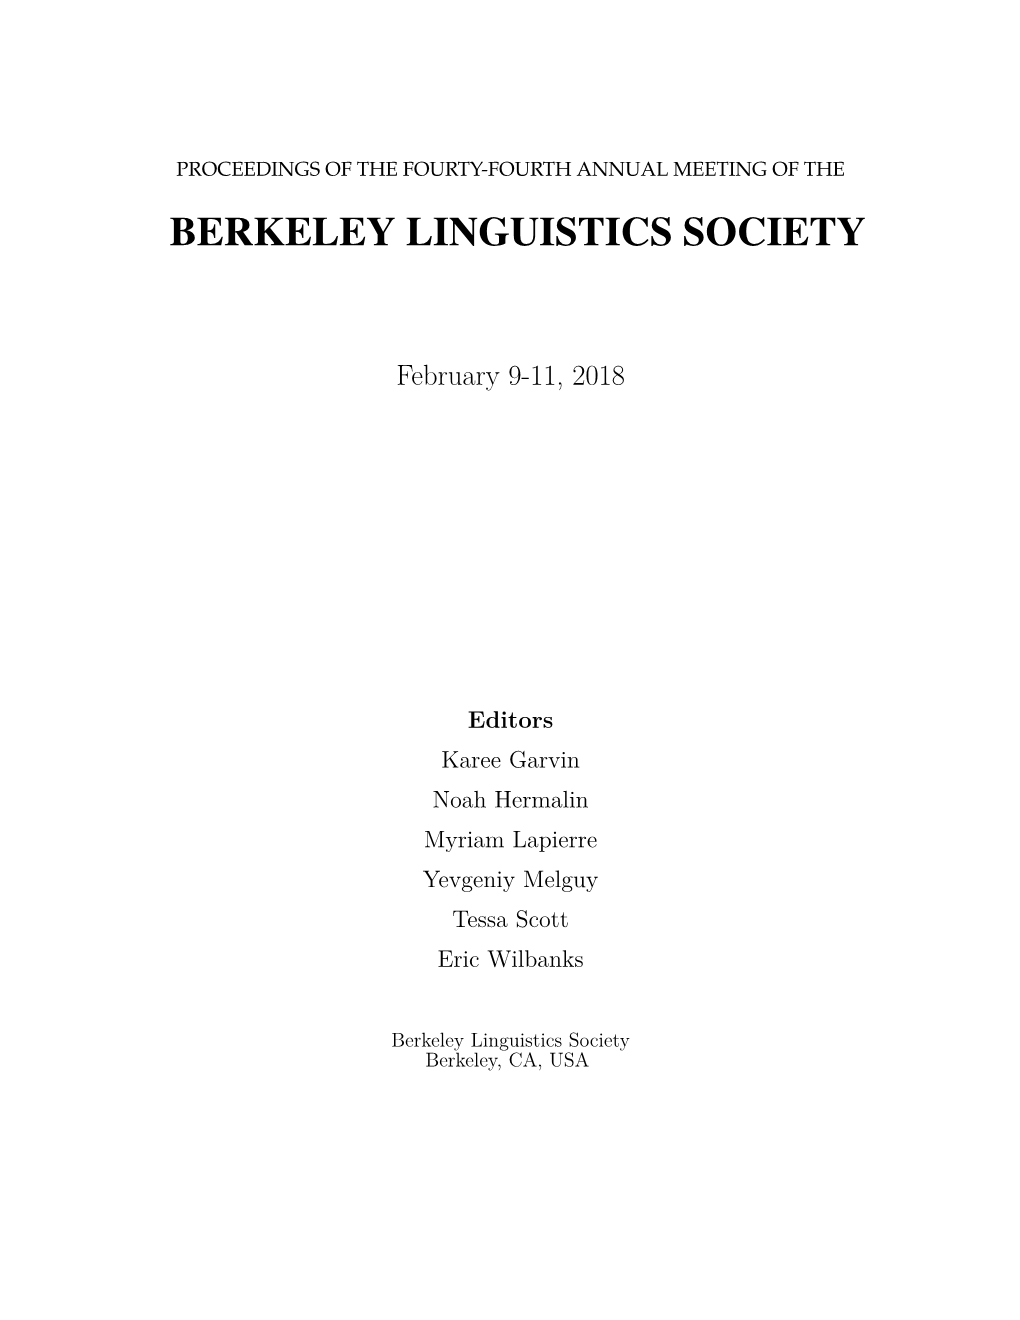 Proceedings of the Fourty-Fourth Annual Meeting of the Berkeley Linguistics Society